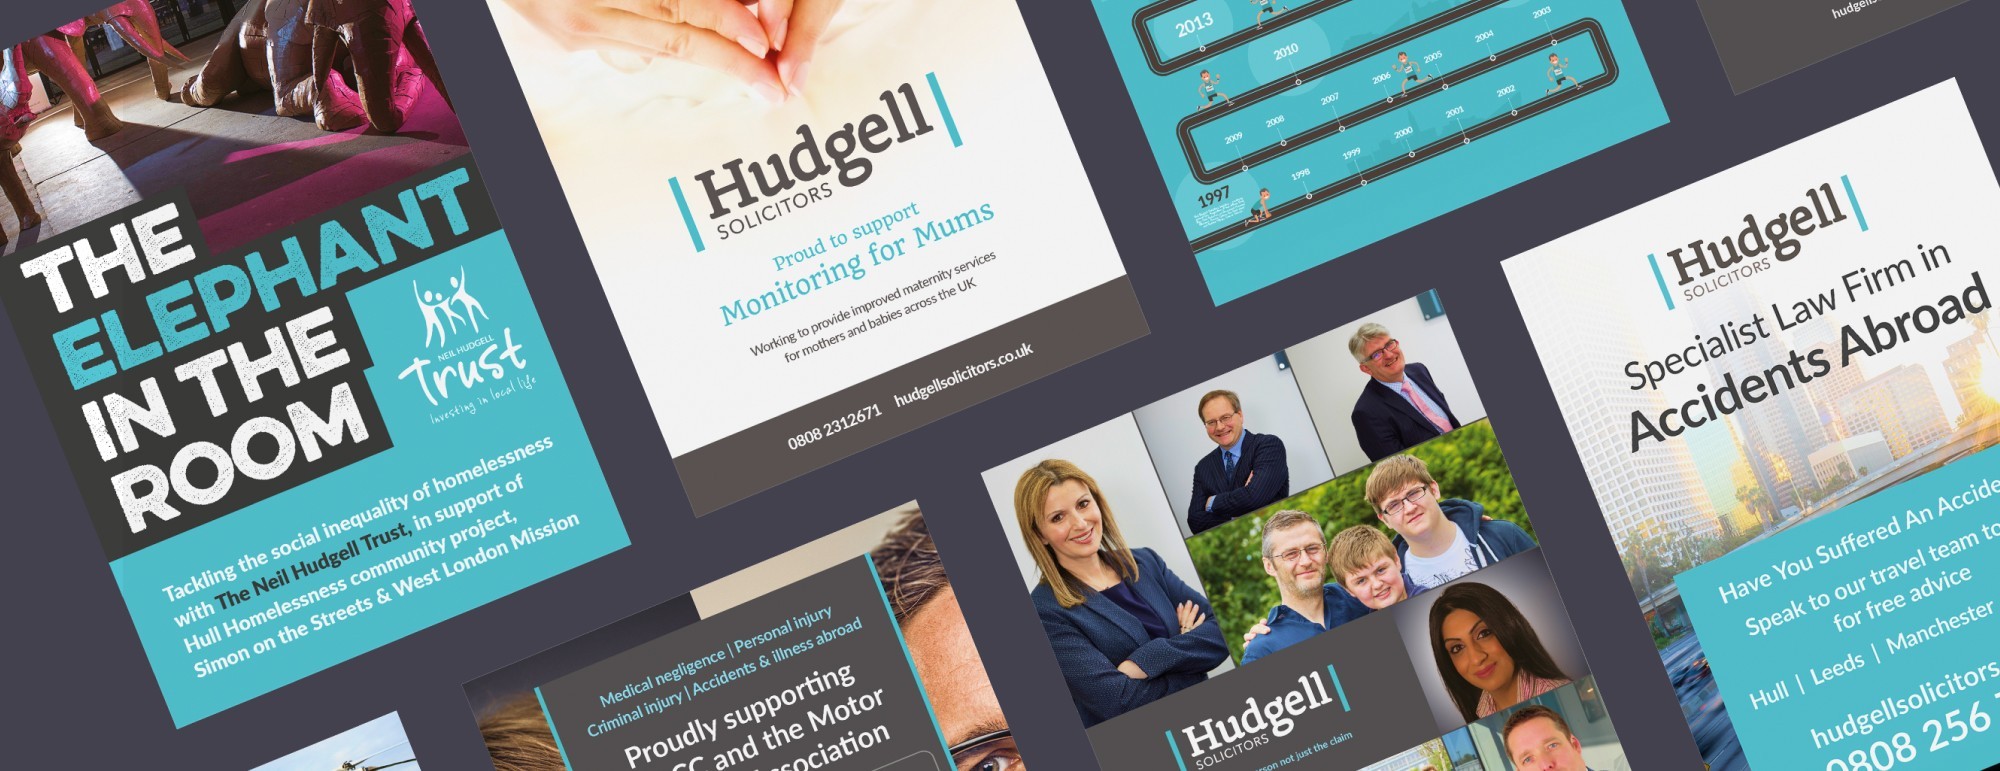 Selection of Hudgell Solicitors Leaflets